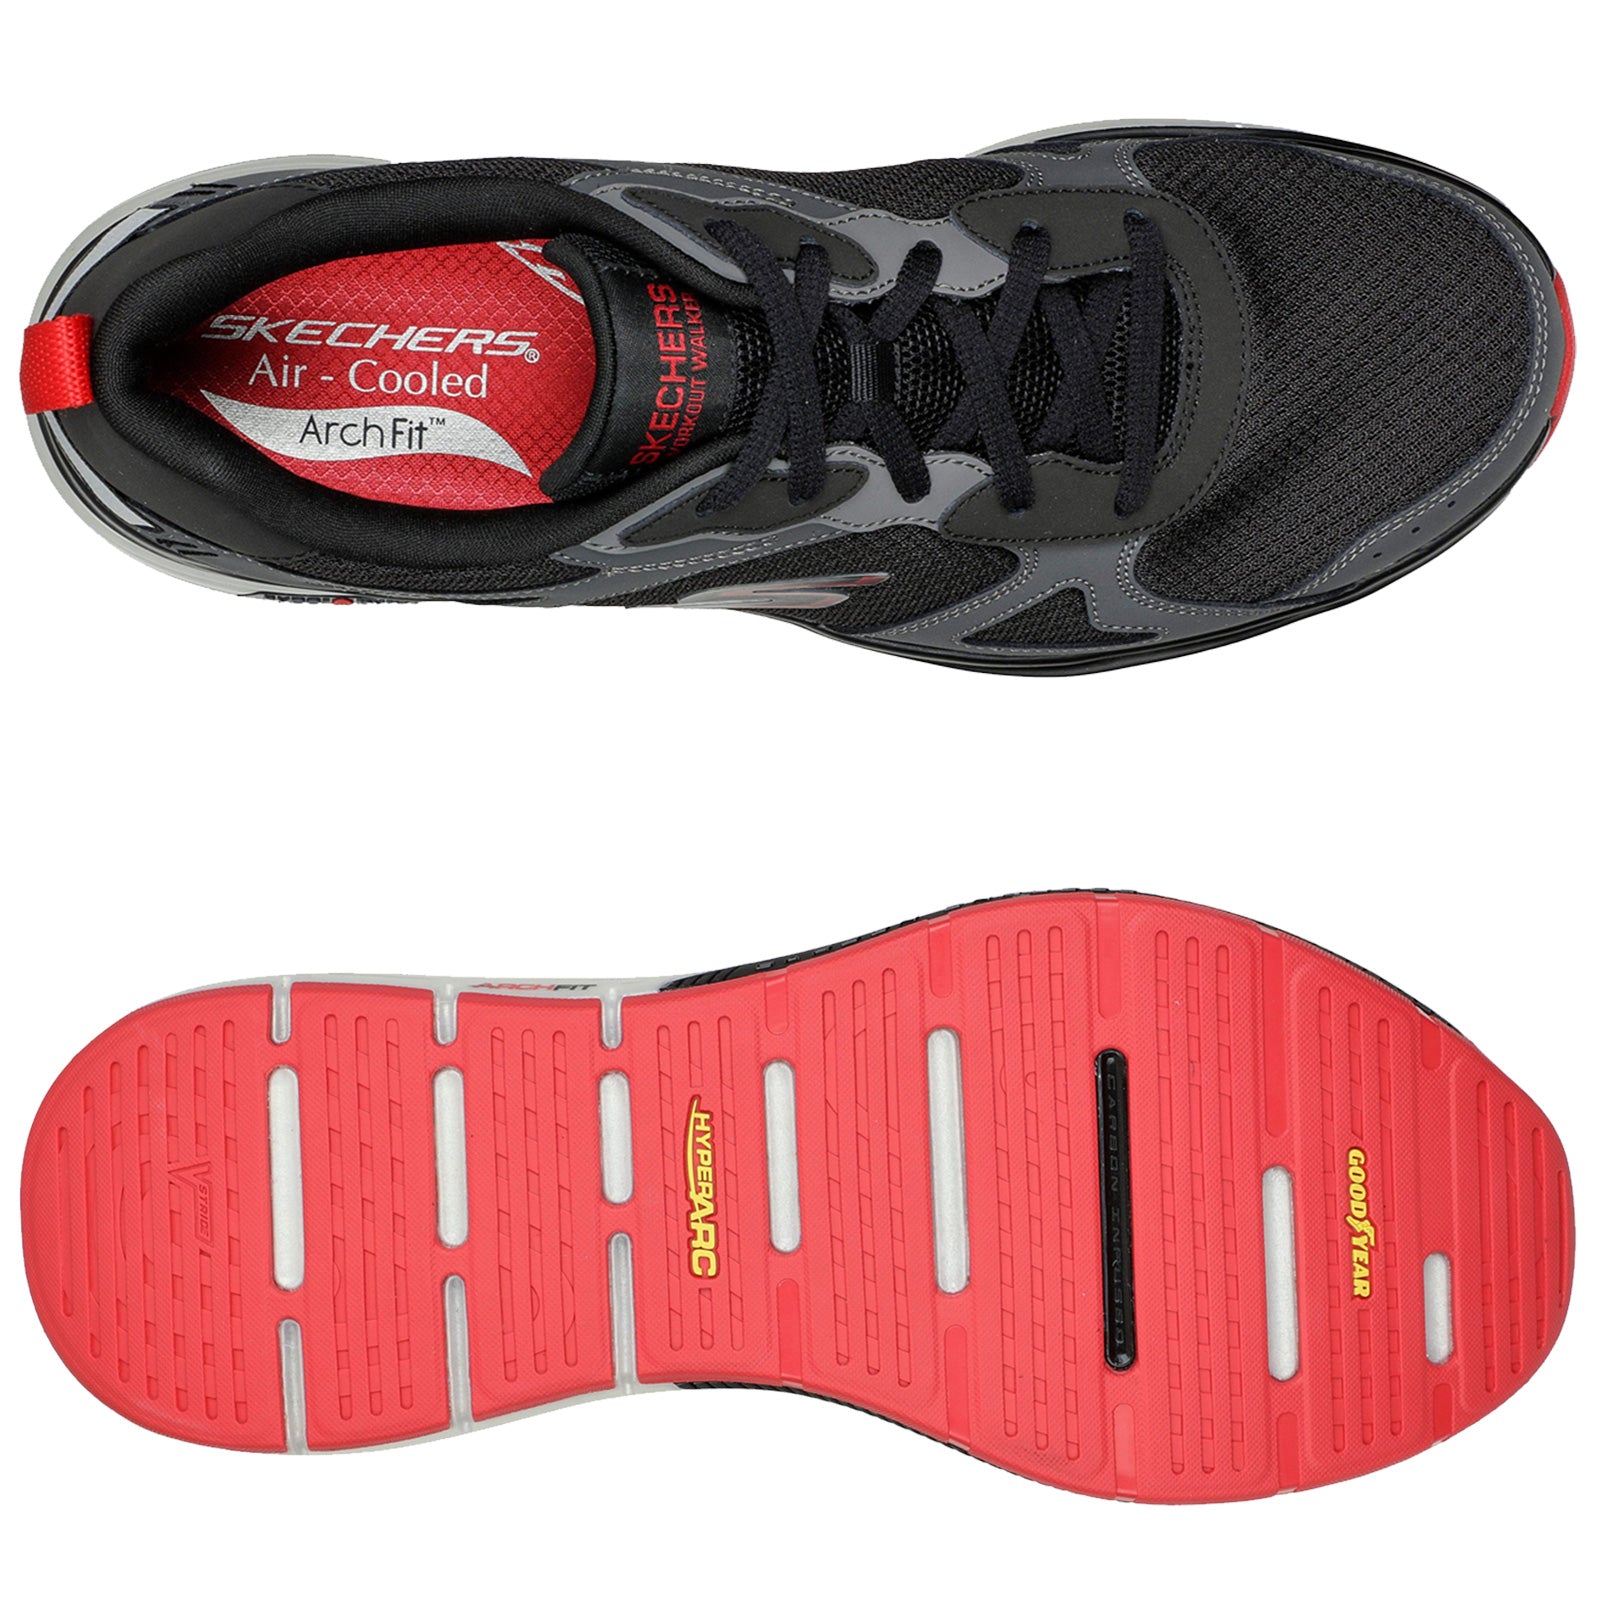 Buy Skechers Red The GO WALK Pants from Next Luxembourg